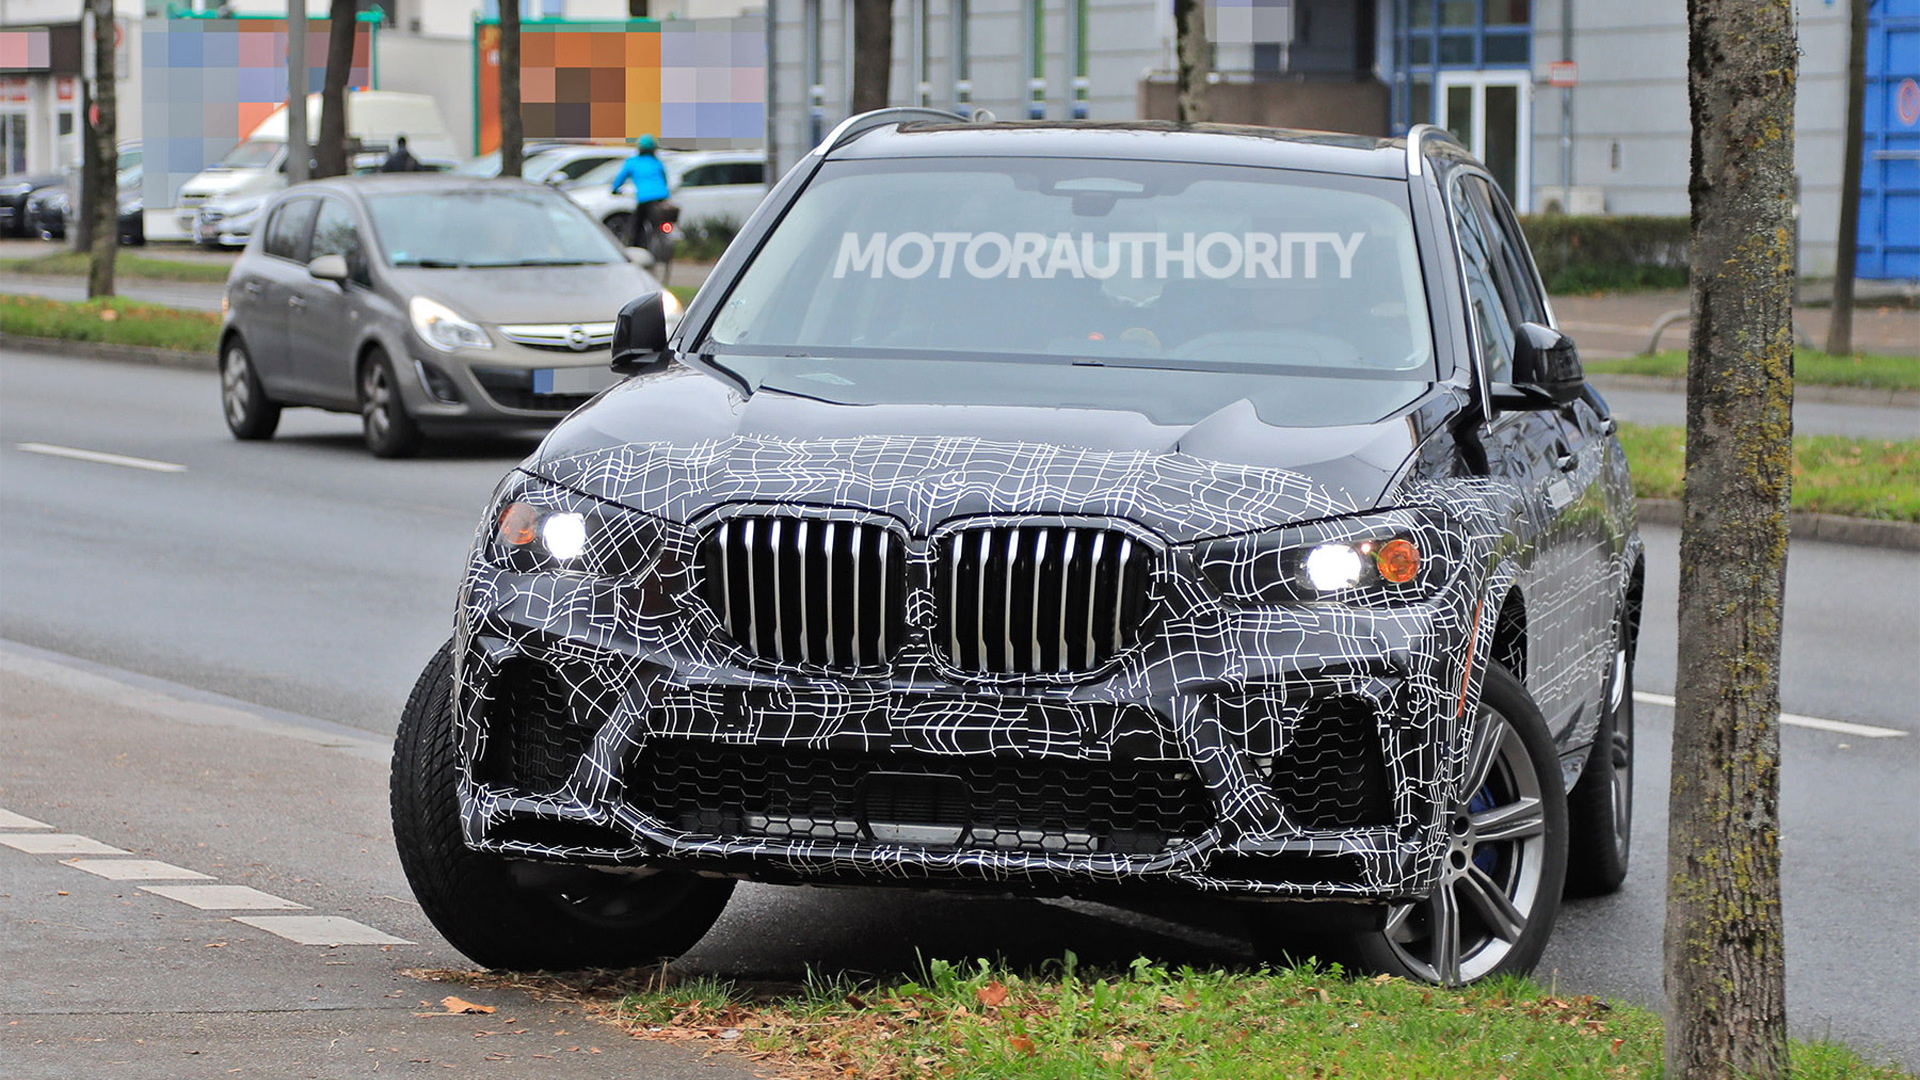 2023 BMW X5 spy shots: Mild facelift pegged for popular SUV